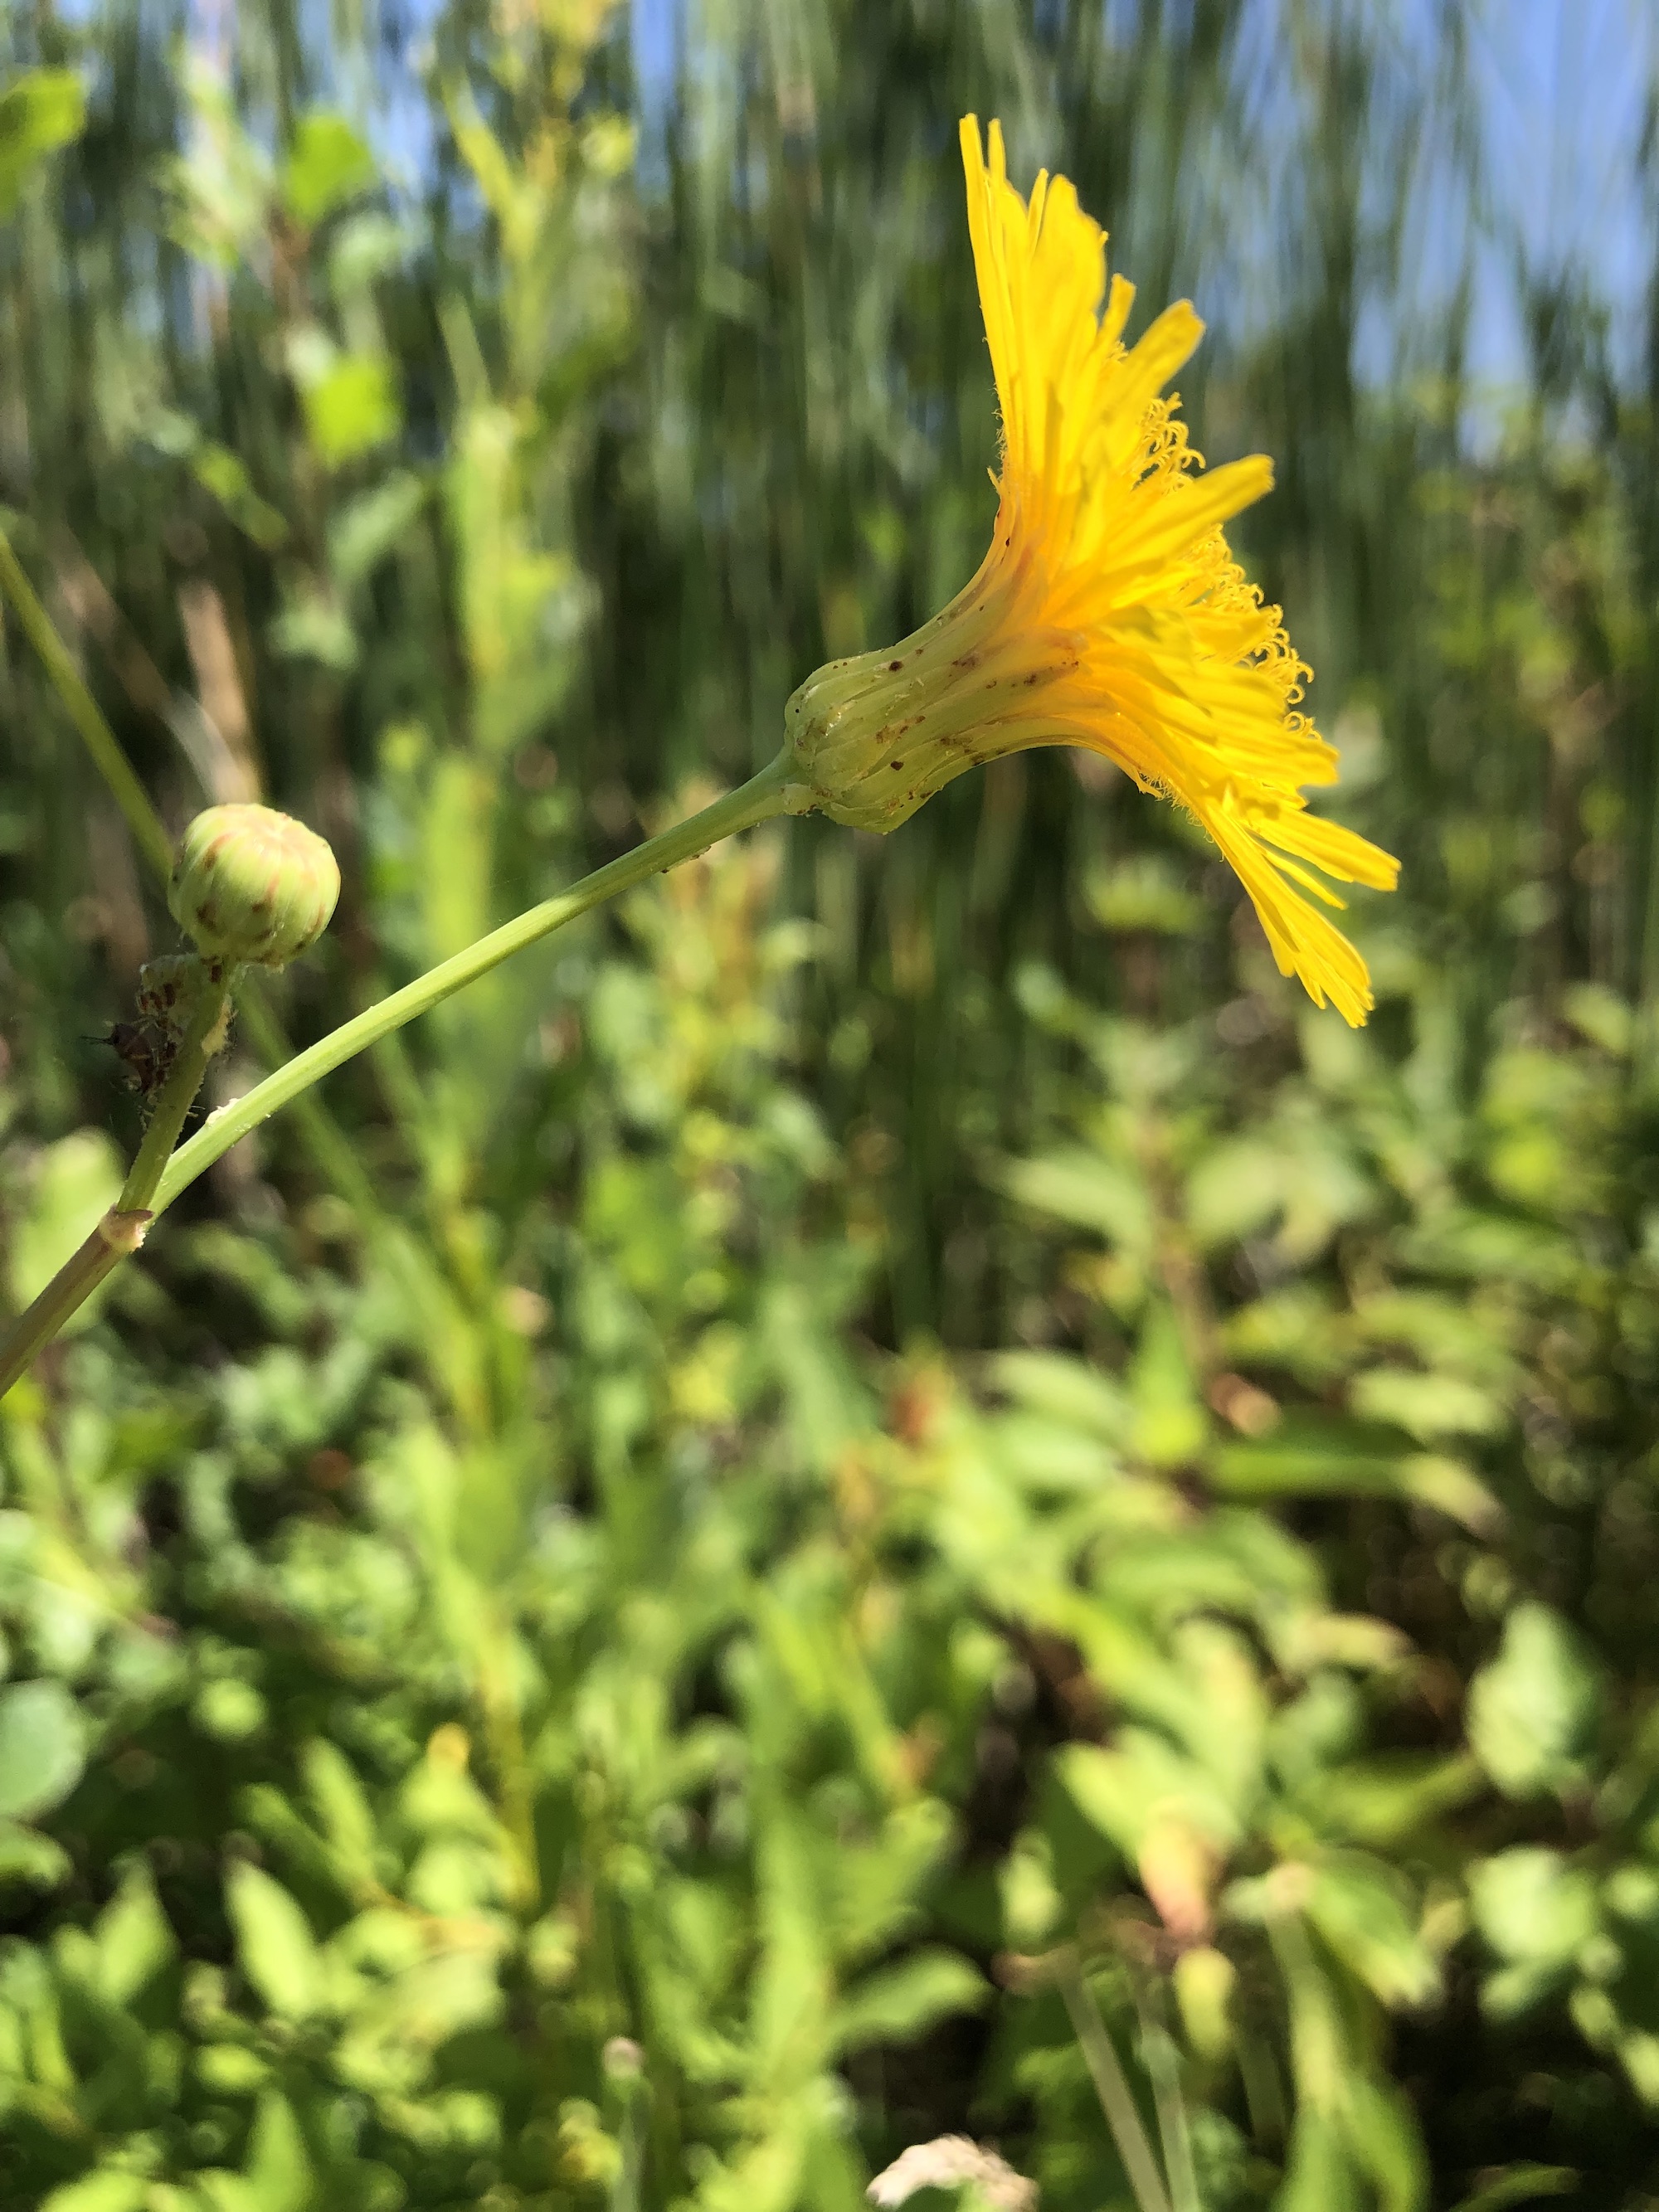 Perennial Sowthistle along shore of Lake Wingra on July 14, 2022.